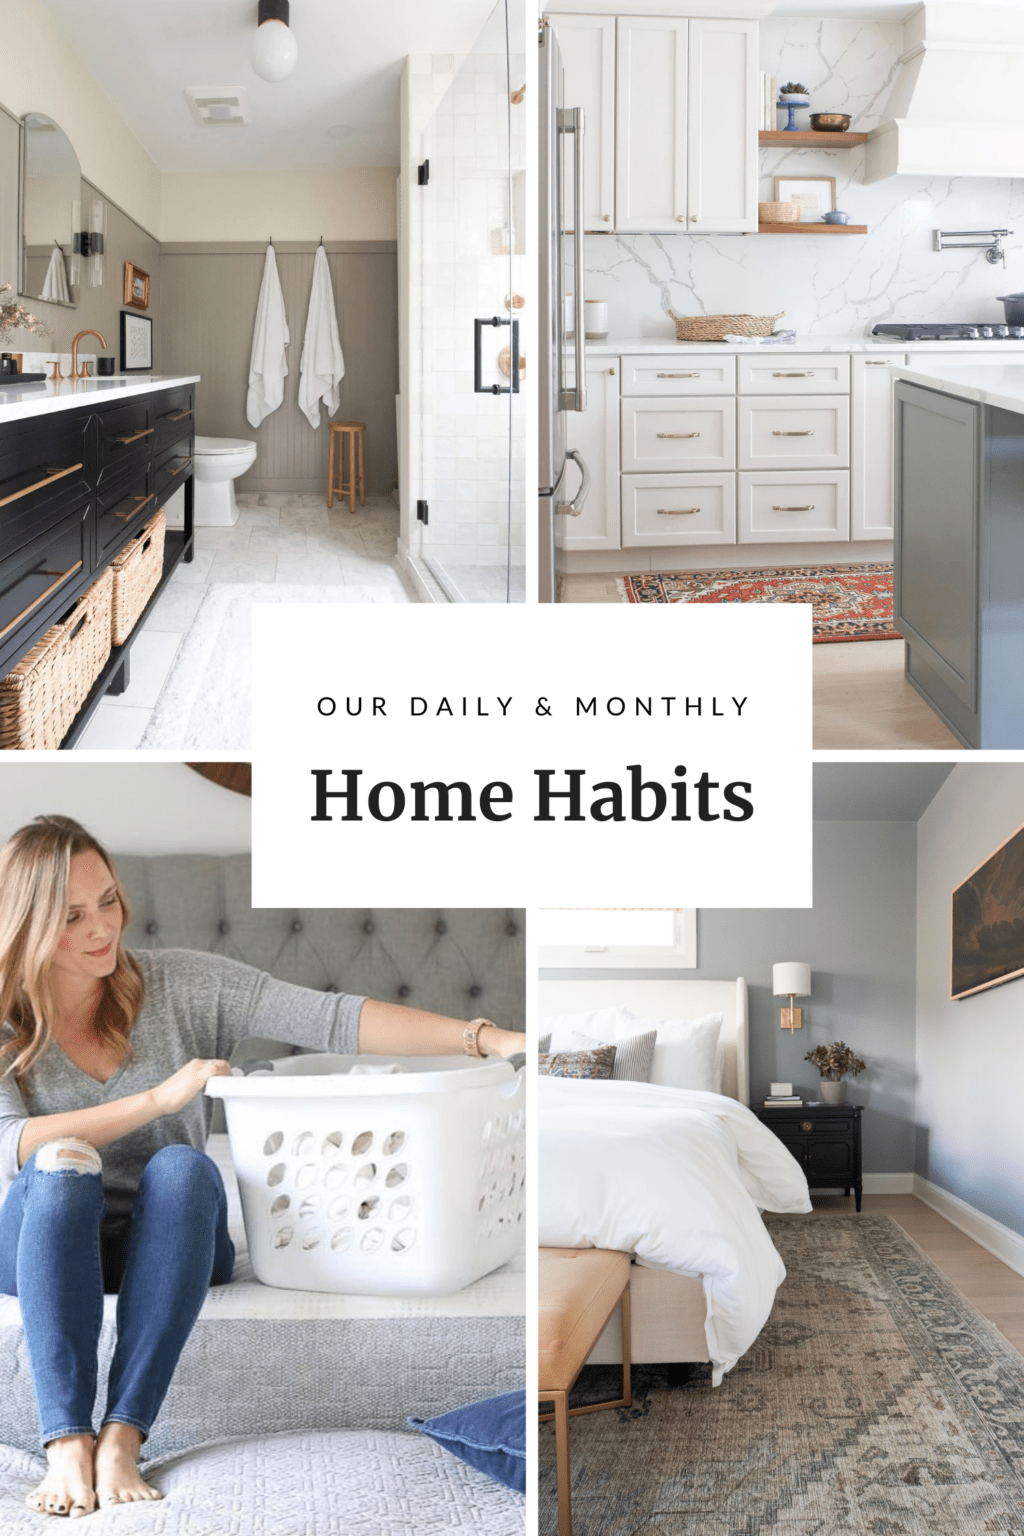 Our daily and monthly home habits